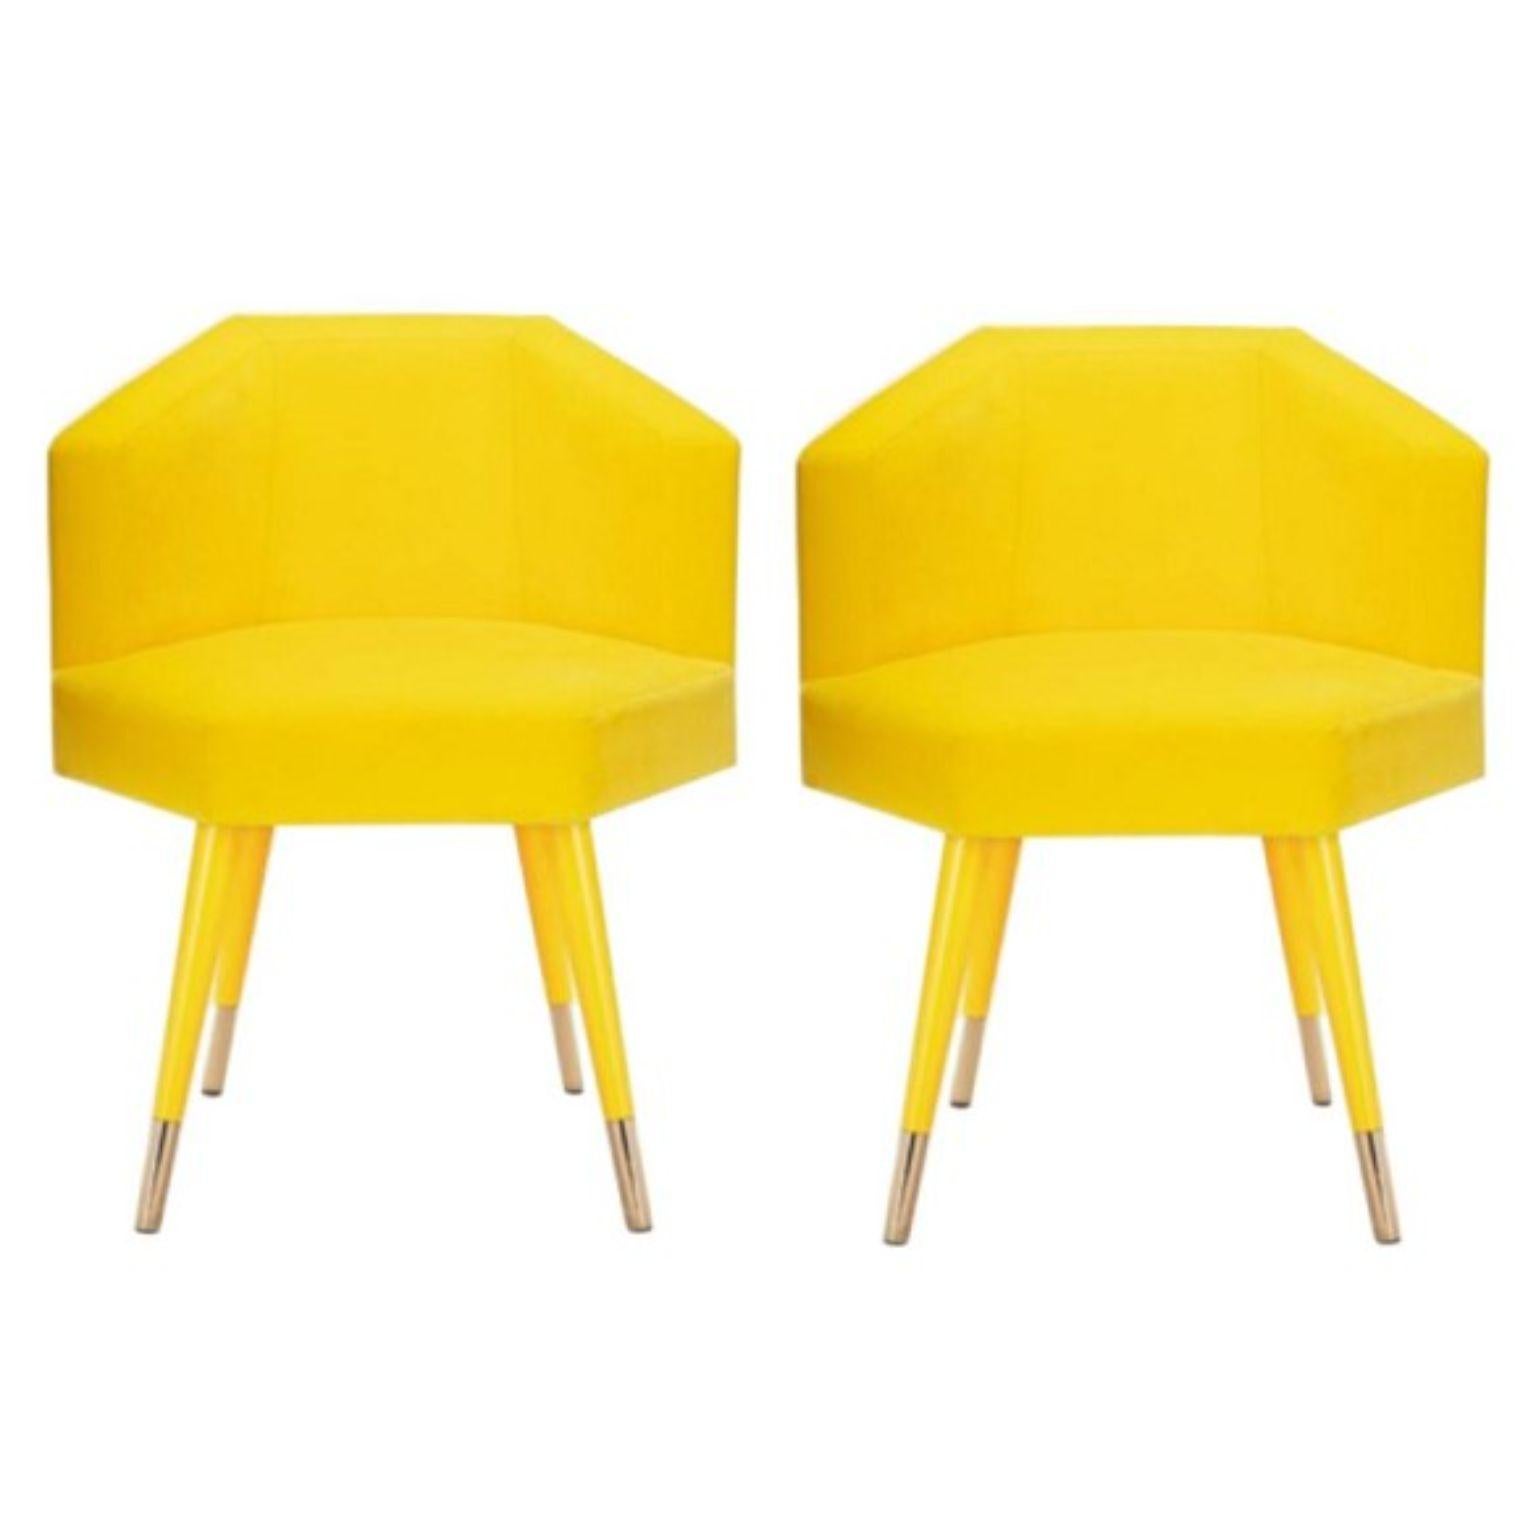 Set of 2 Beelicious dining chairs, Royal Stranger
Dimensions: 63 x 55 x 68 cm
Materials: Upholstery Lemongrass cotton velvet, Lemongrass lacquered wood with glossy finish. Feet covers Polished Brass.


Hexagonal in shape, the Beelicious chair